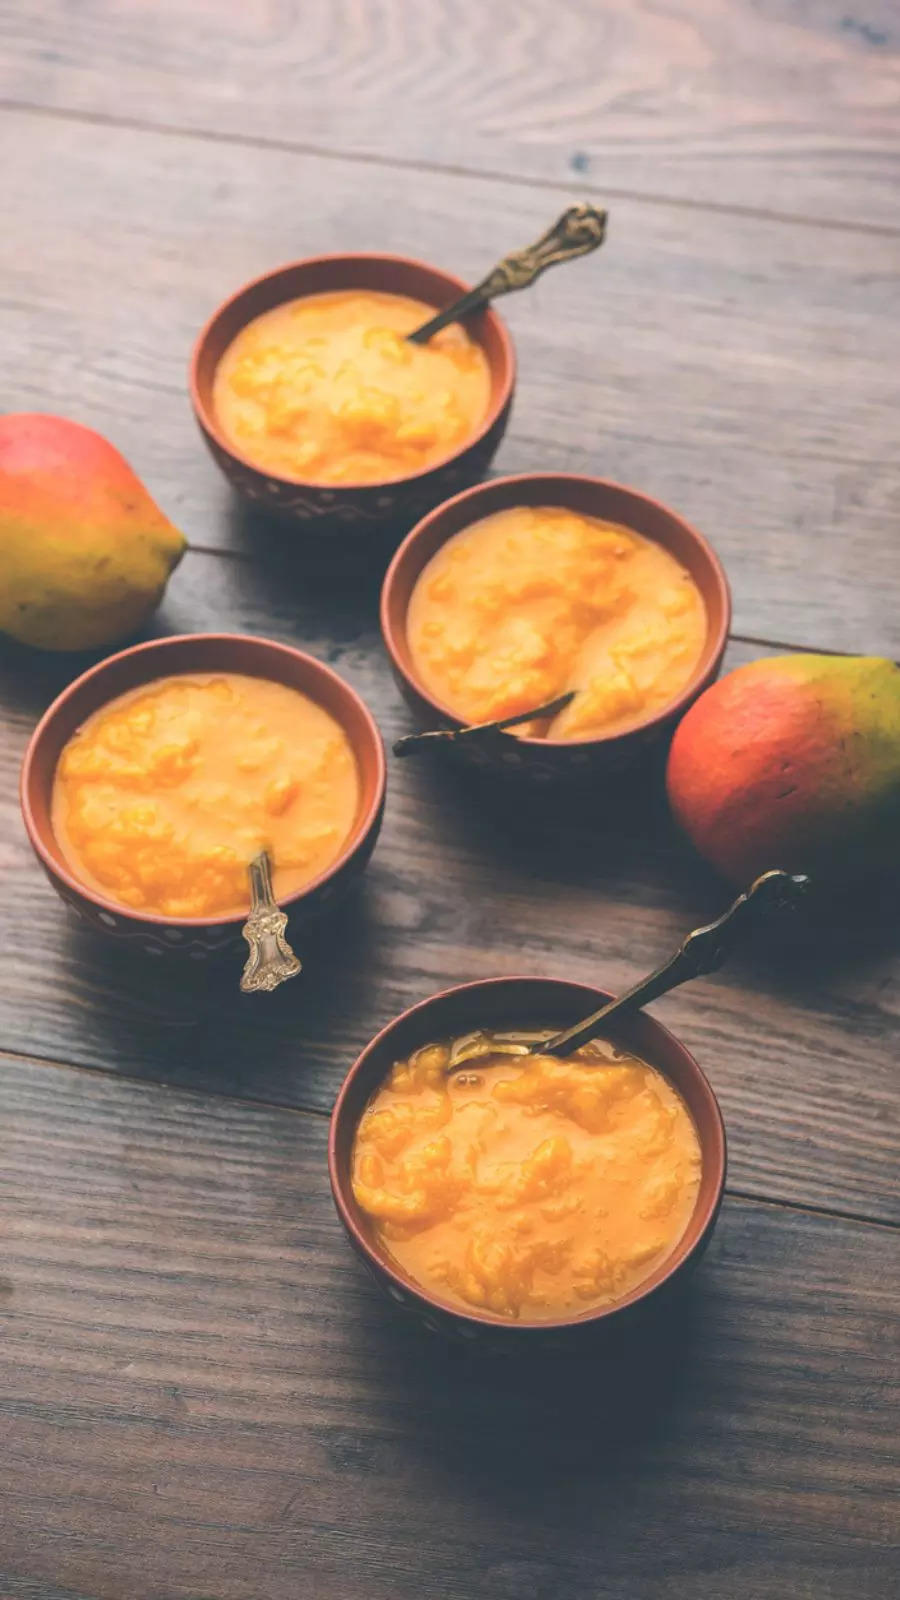 10 best mango dishes in the world: Aamras is No. 1